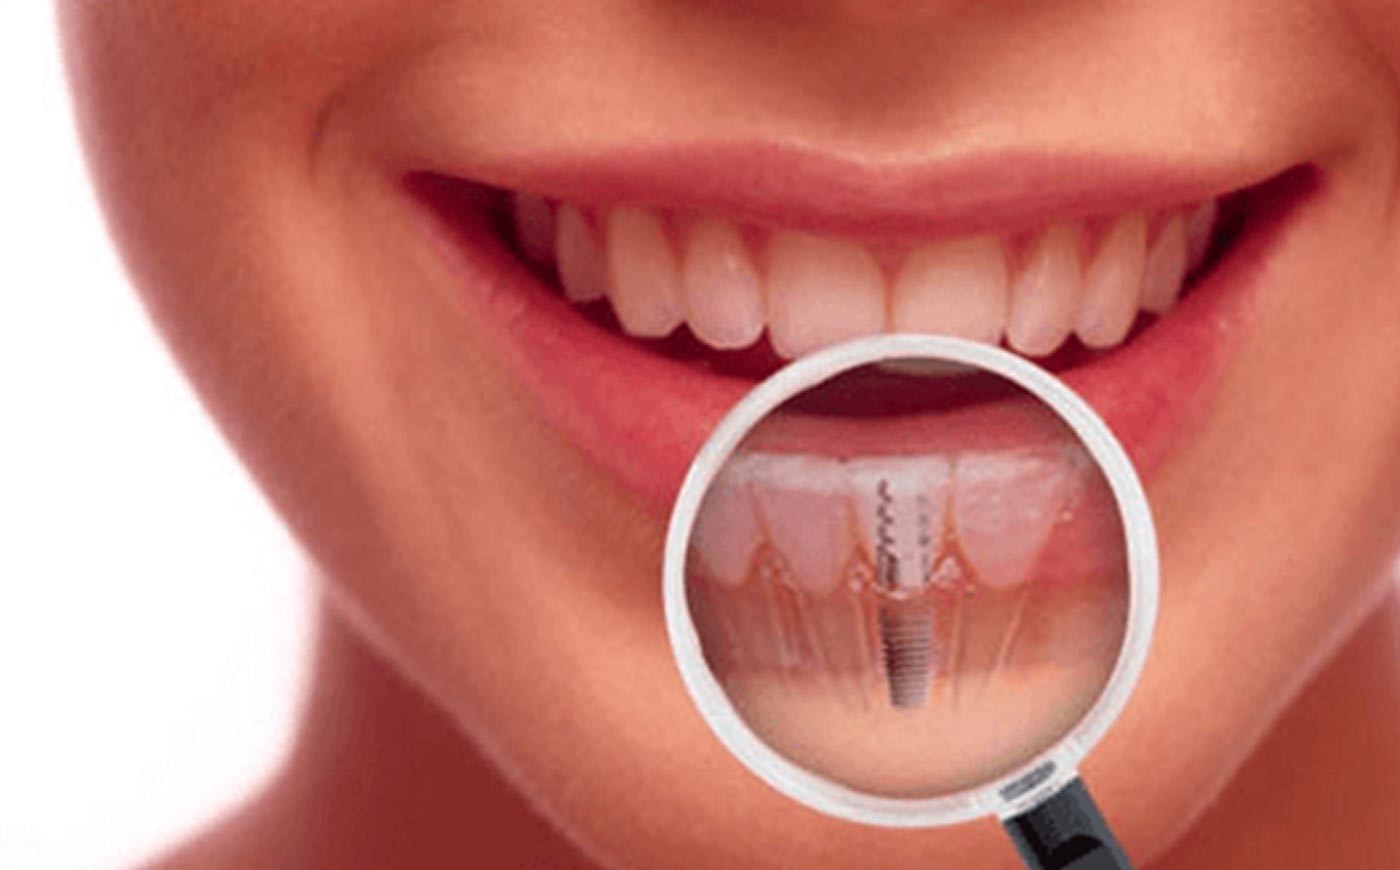 YOUR THIRD DENTITION- DENTAL IMPLANTS